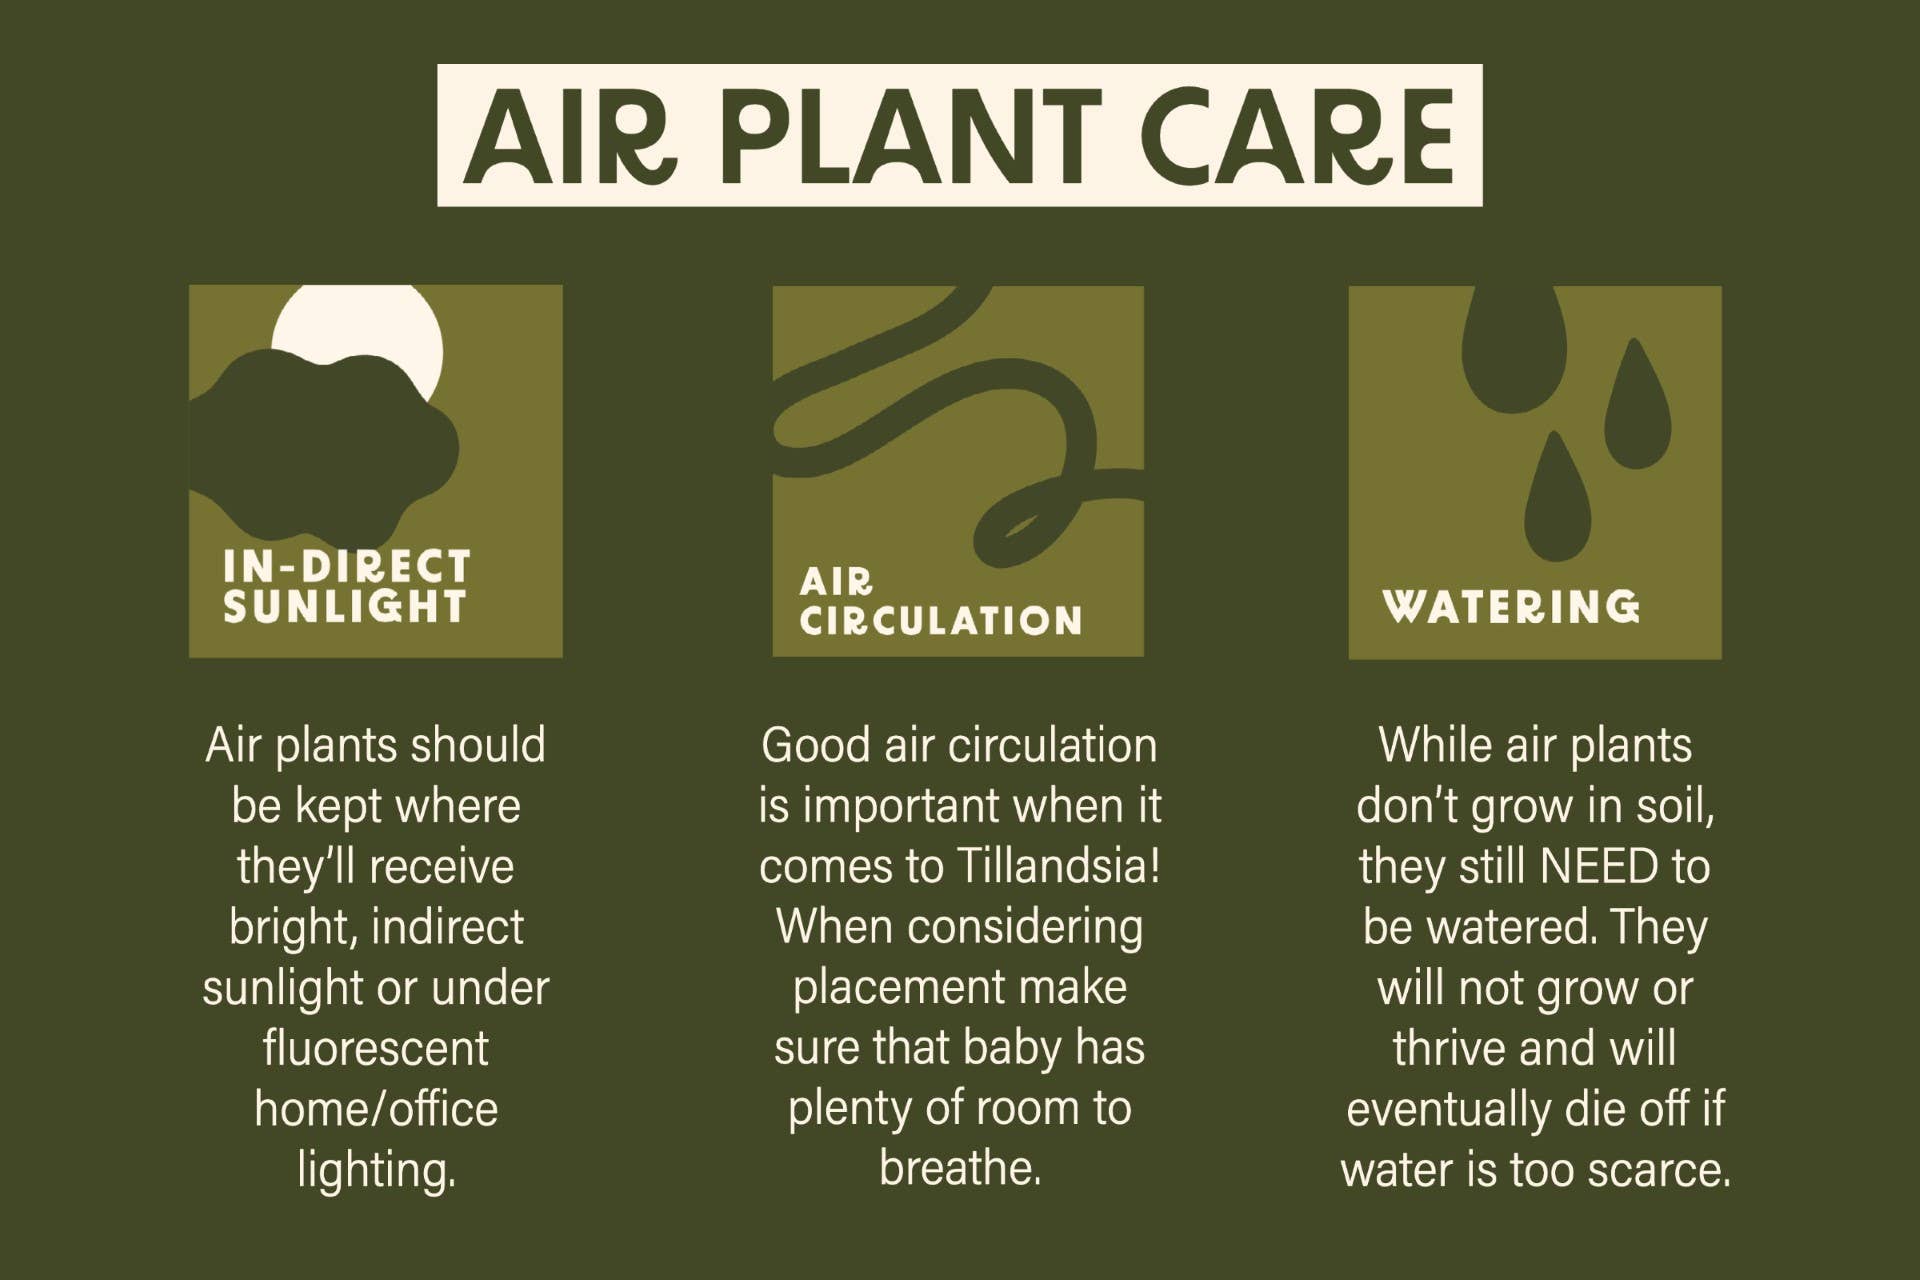 Baileyi Air Plant care infographic providing information on sunlight and CAM photosynthesis.